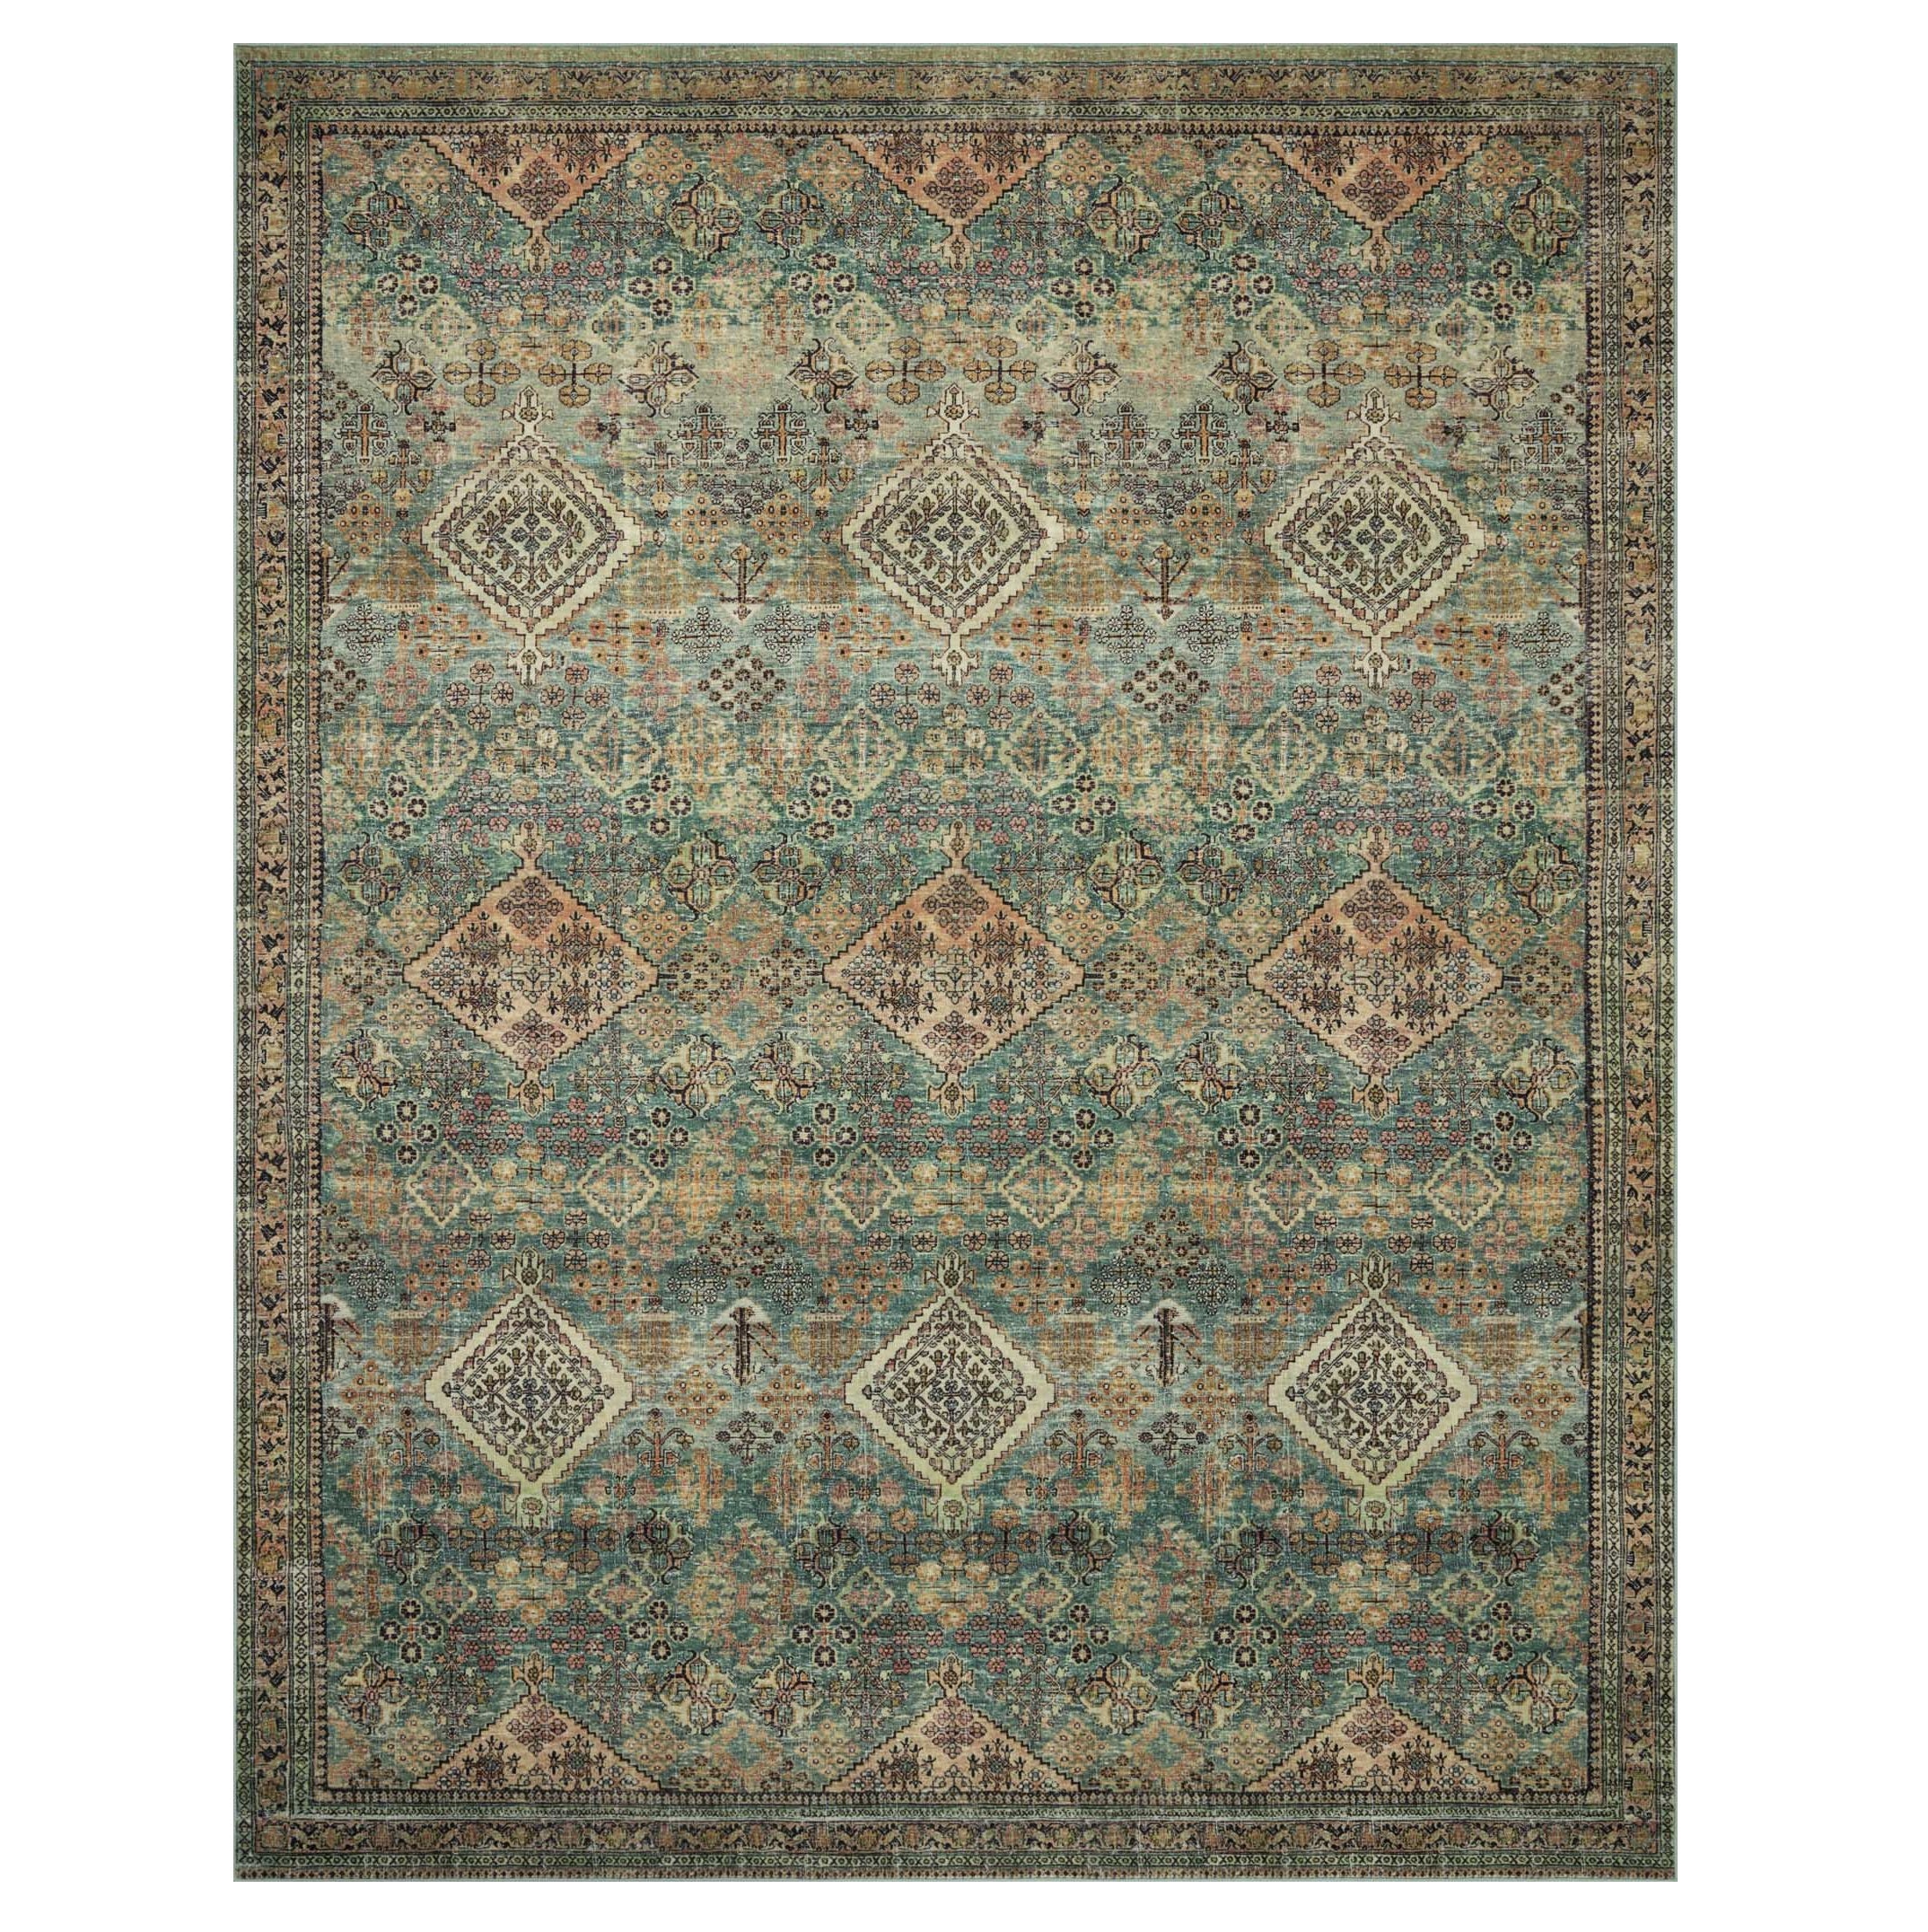 Sinclair Turquoise Multi Rug Items range from $69.00 to $709.00